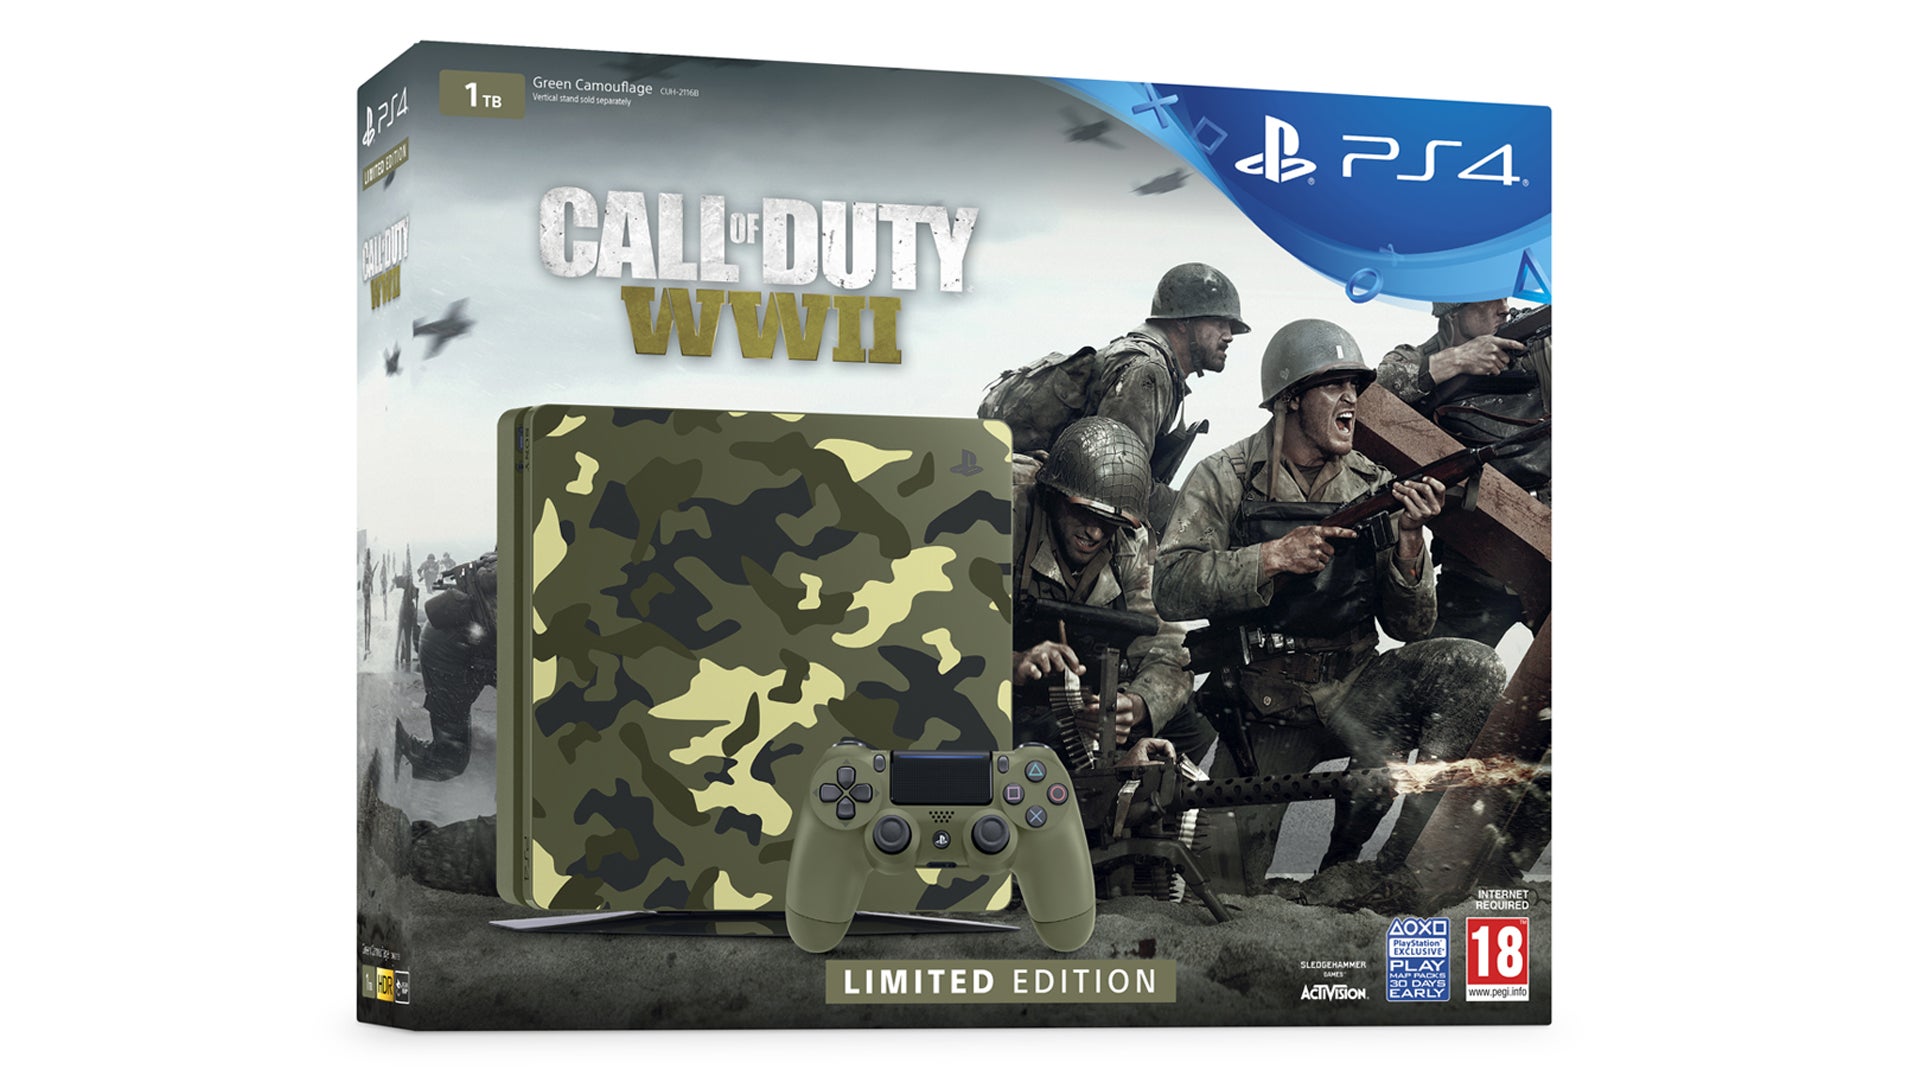 Image for Limited Edition Call of Duty WW2 PS4 console available to pre-order in the UK